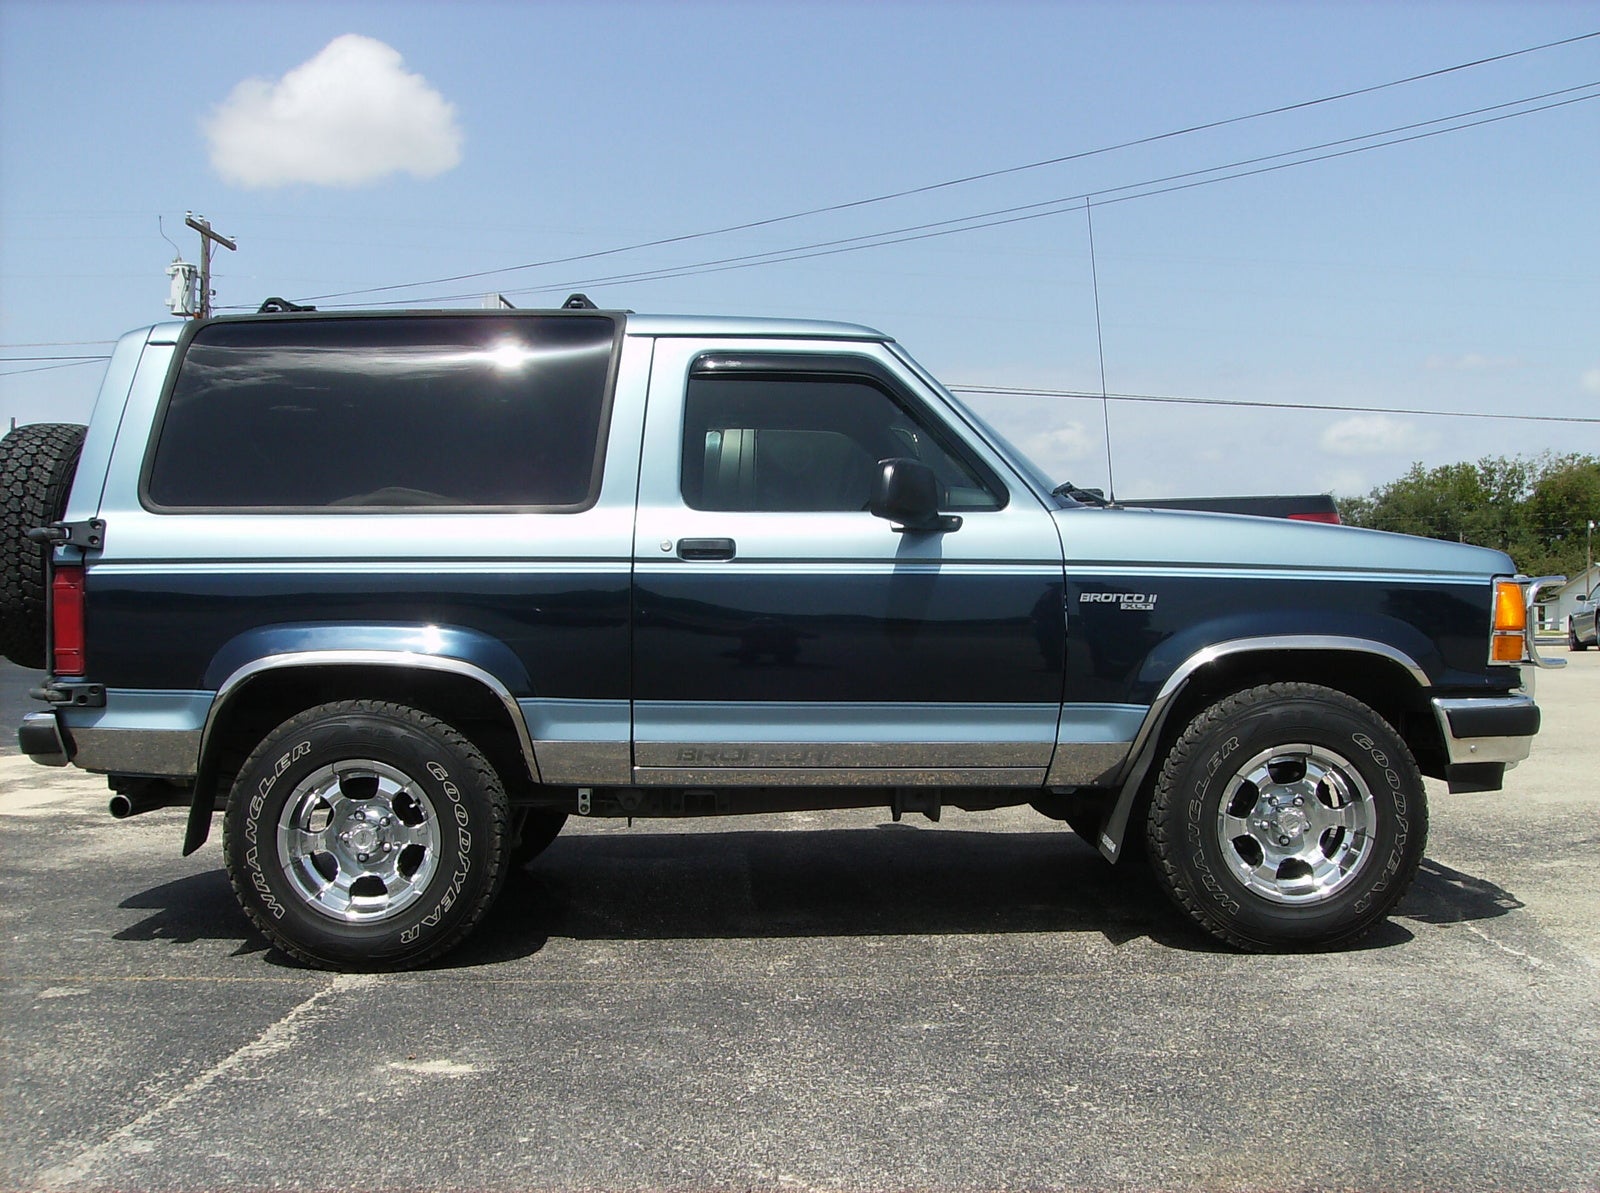 Ford bronco 1989 wiki #3